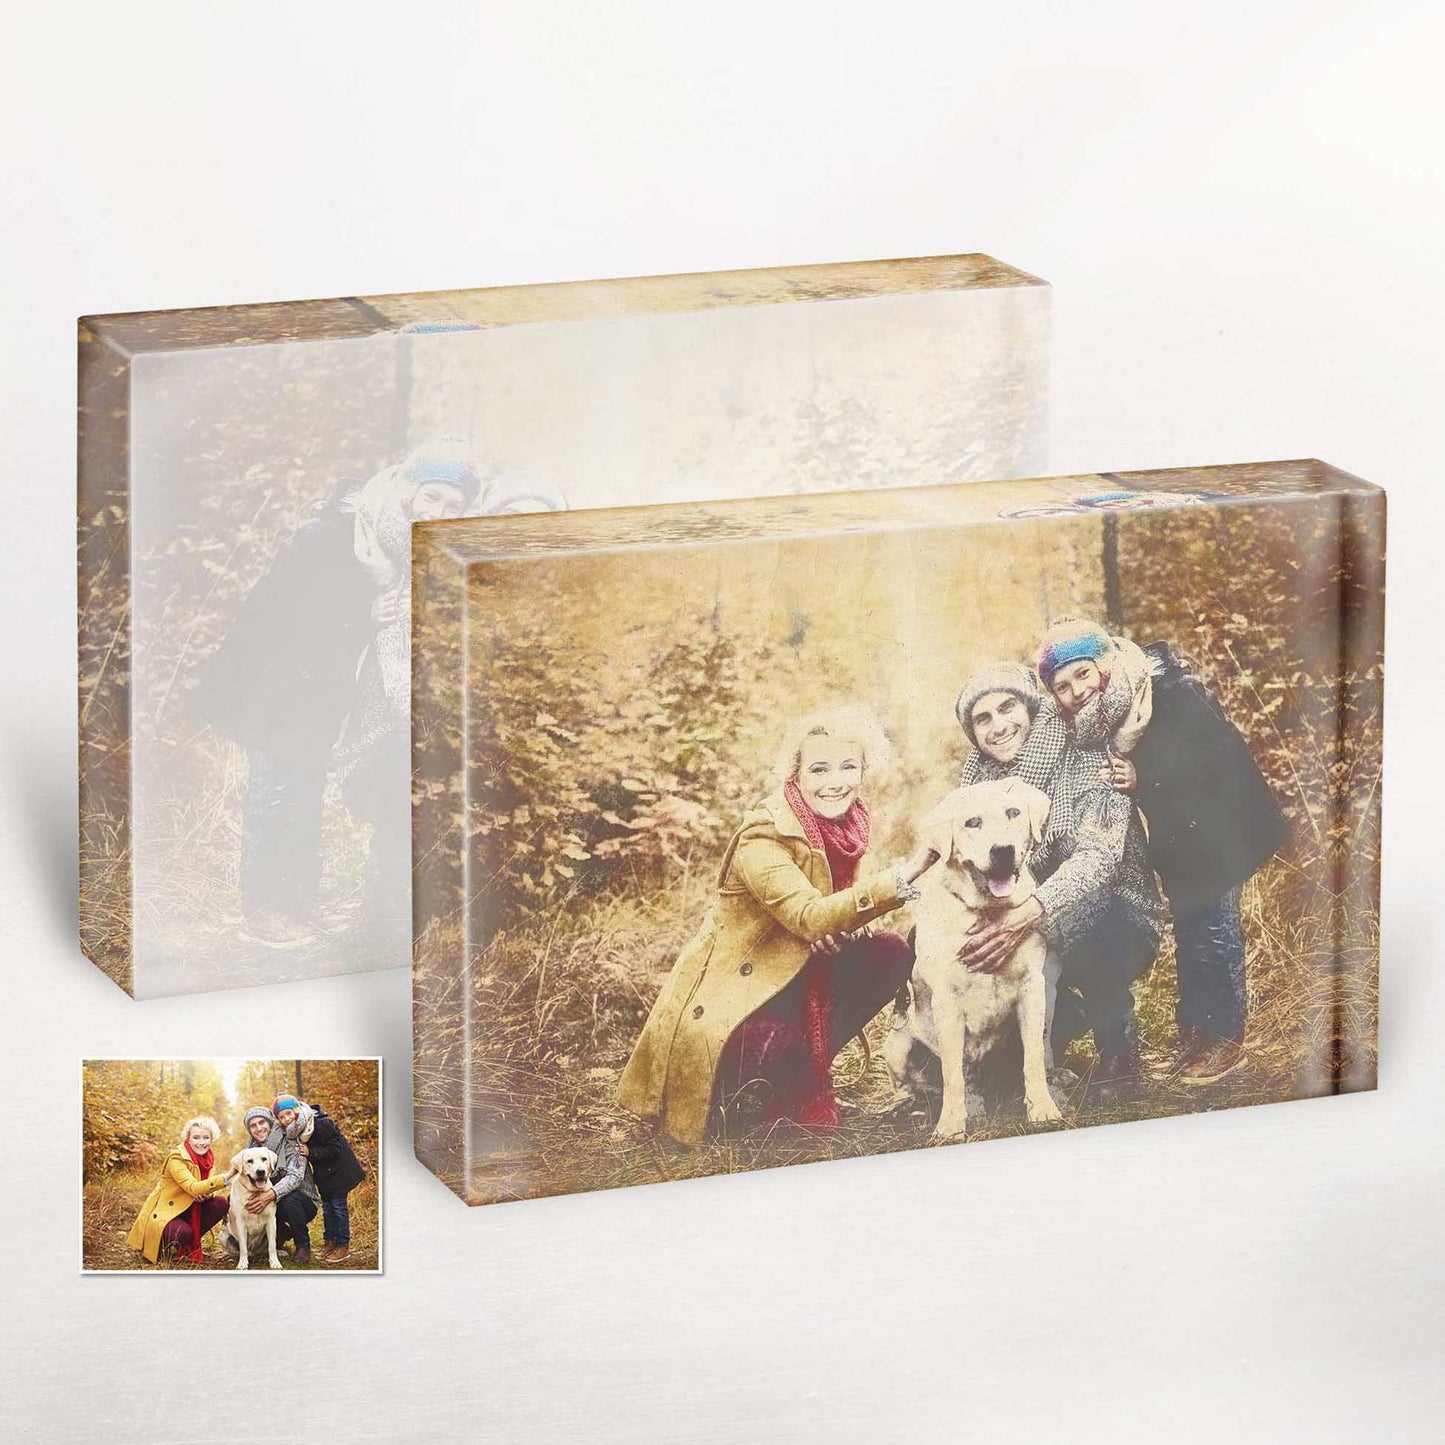 Transform your living space with the Personalised Vintage Gouache Acrylic Block Photo. This exquisite home decor item combines the charm of vintage aesthetics with the modern elegance of acrylic block